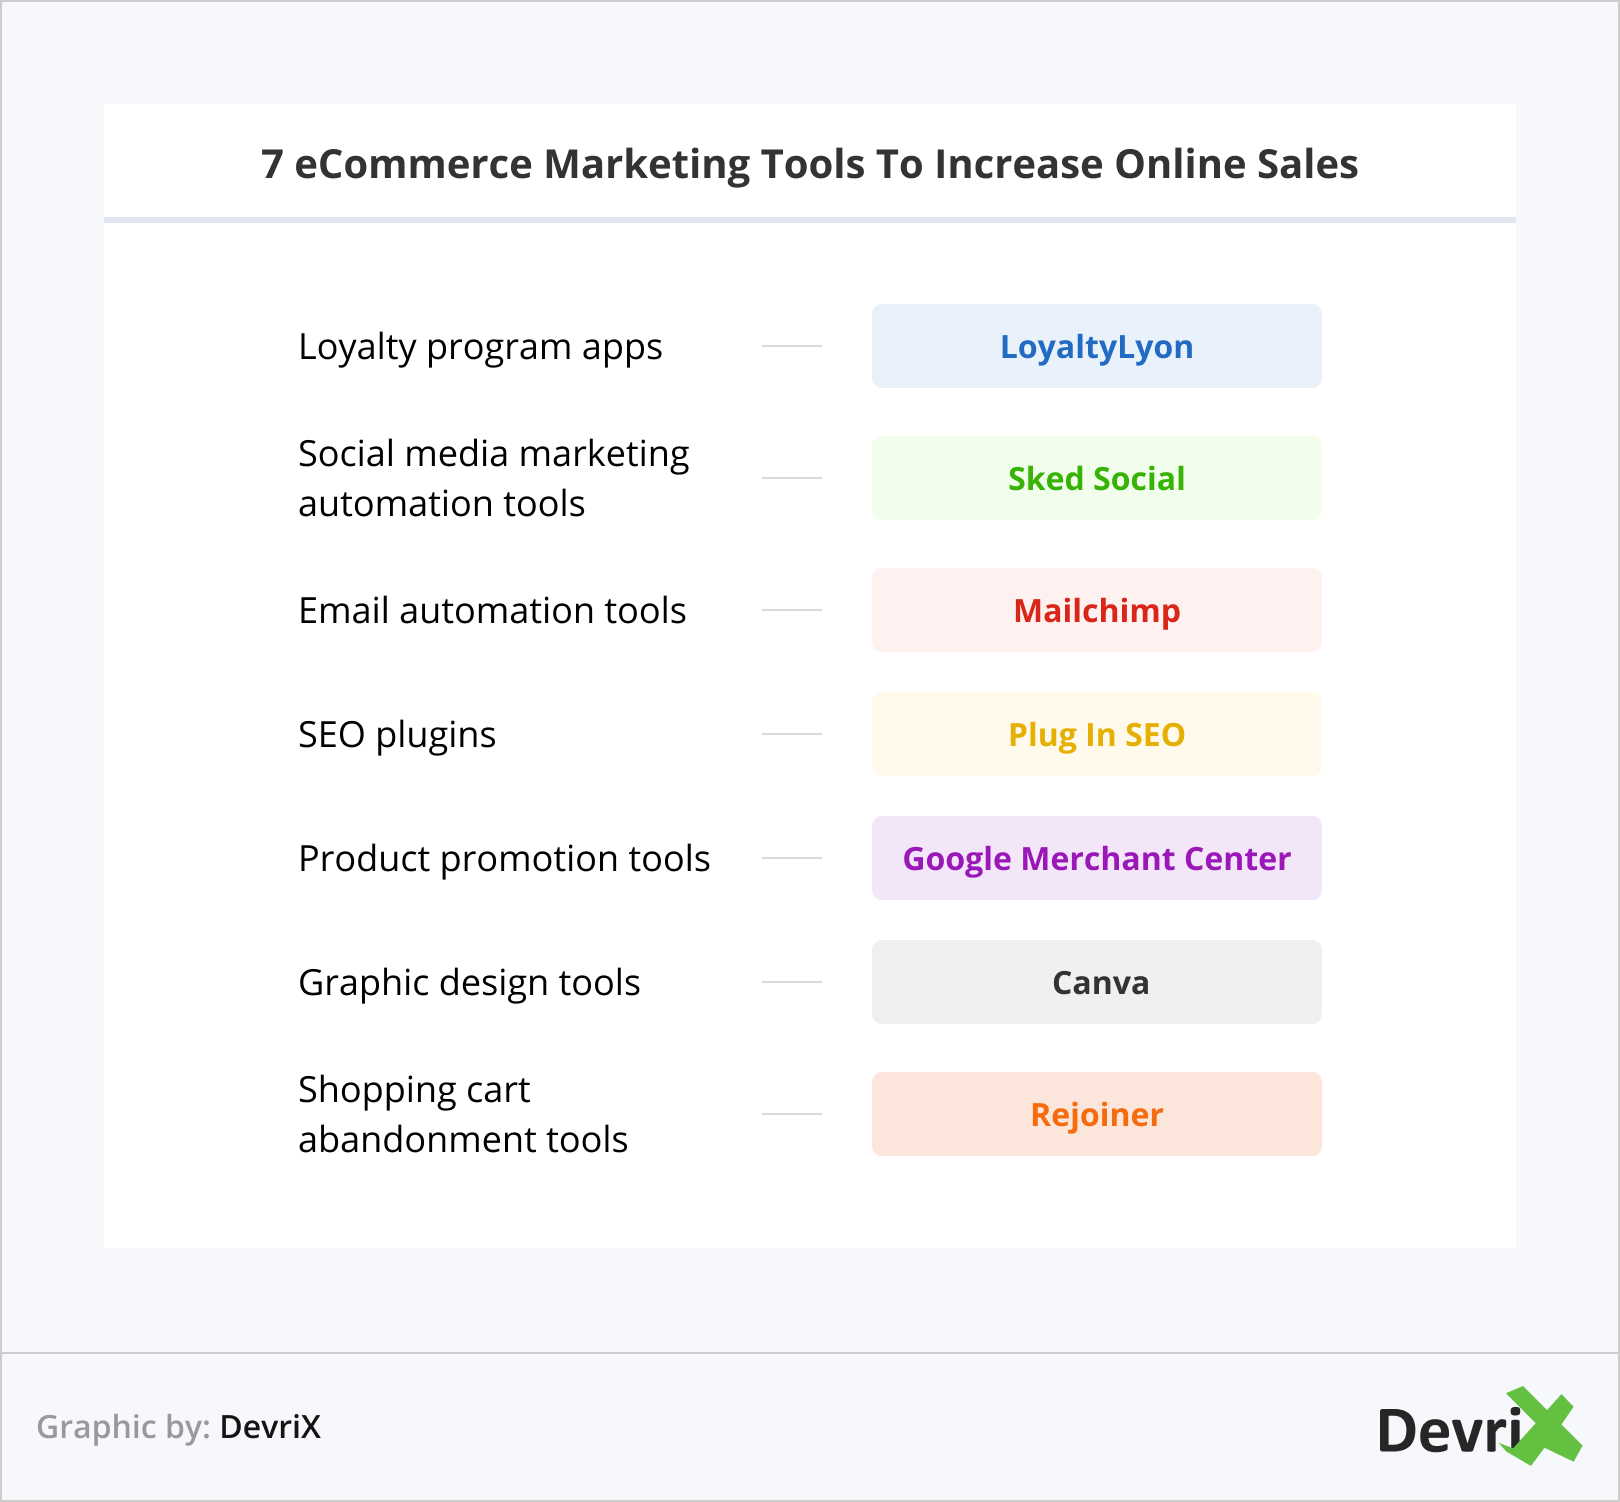 7 eCommerce Marketing Tools To Increase Online Sales